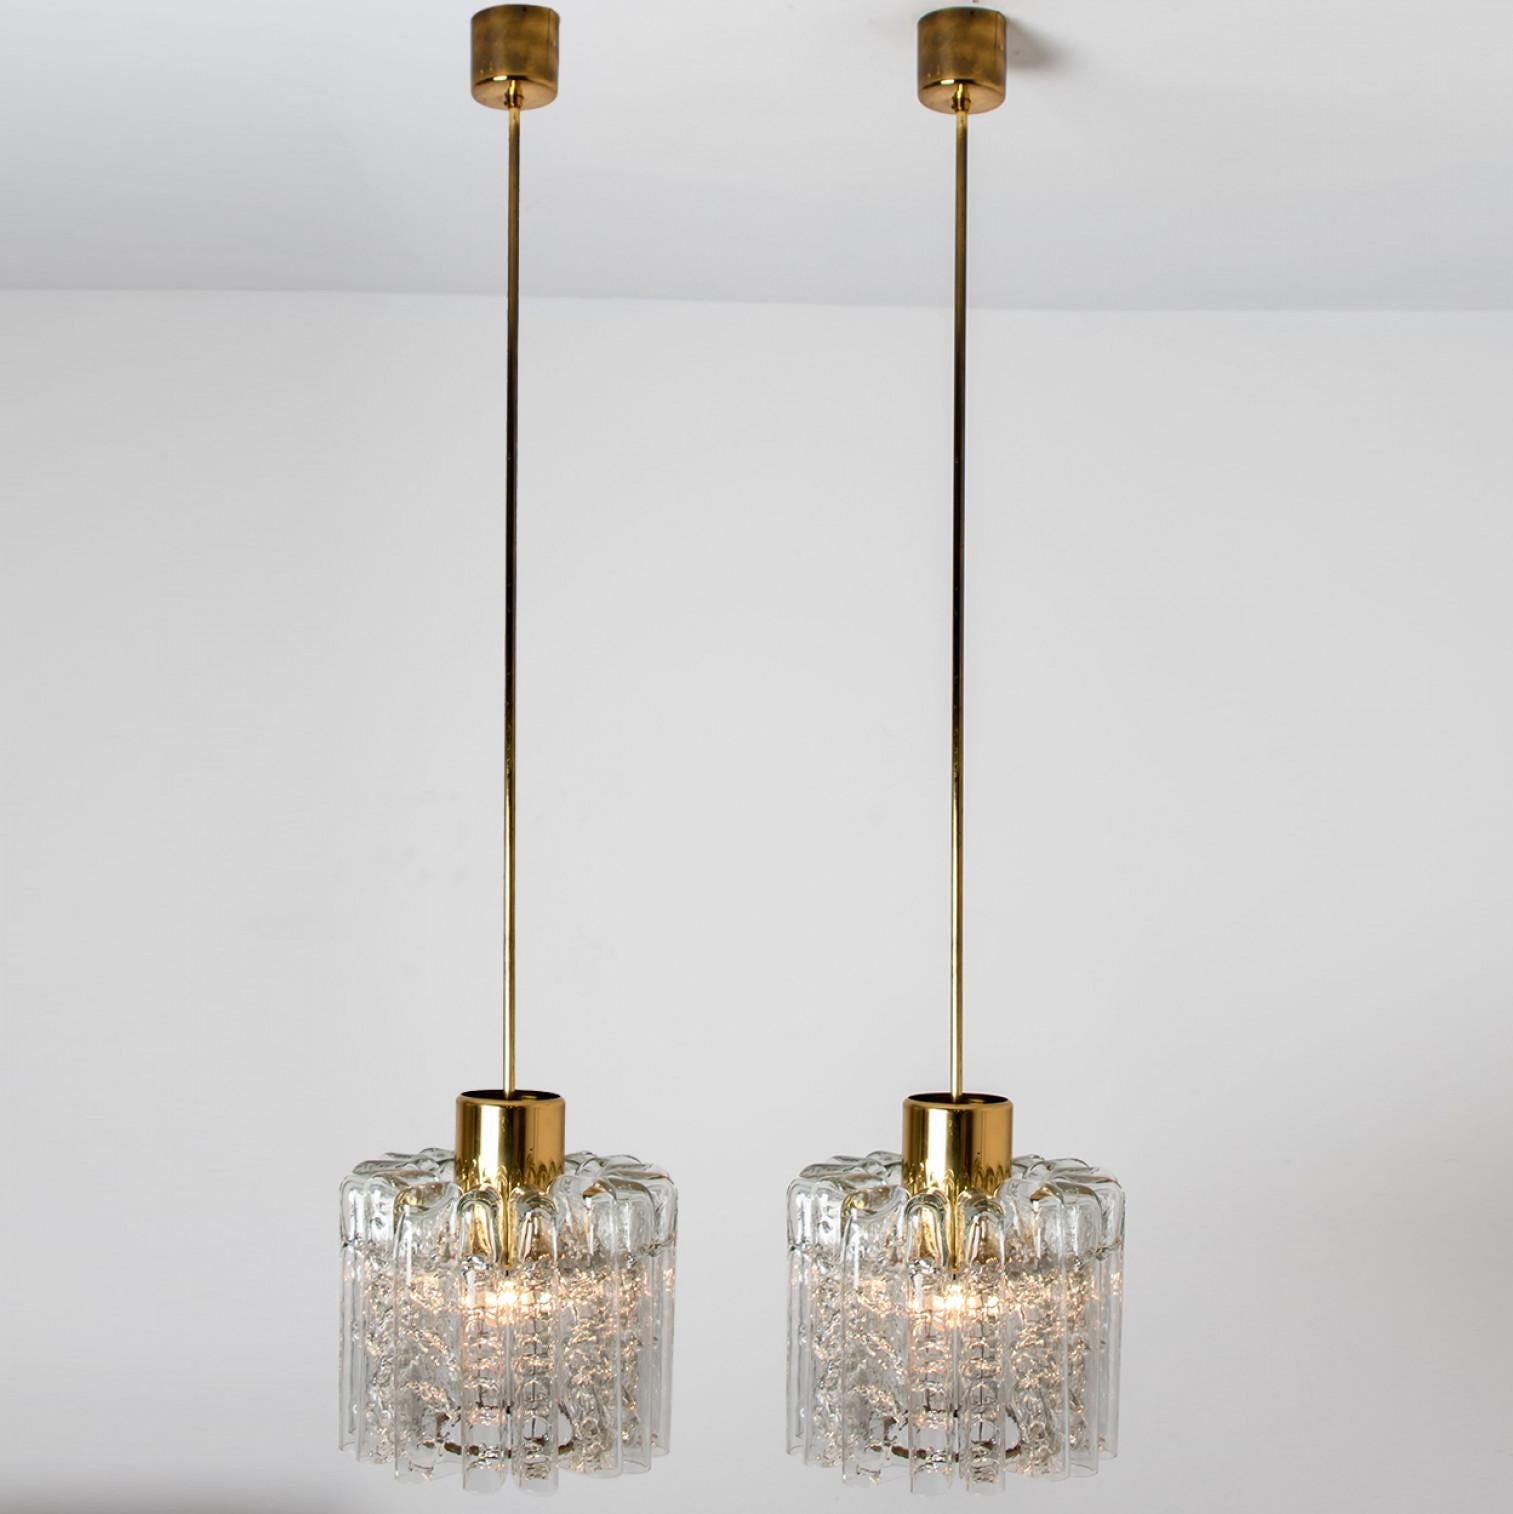 1 of the 2 Round Textured Clear Glass Doria Pendant Lamp, 1960s For Sale 8